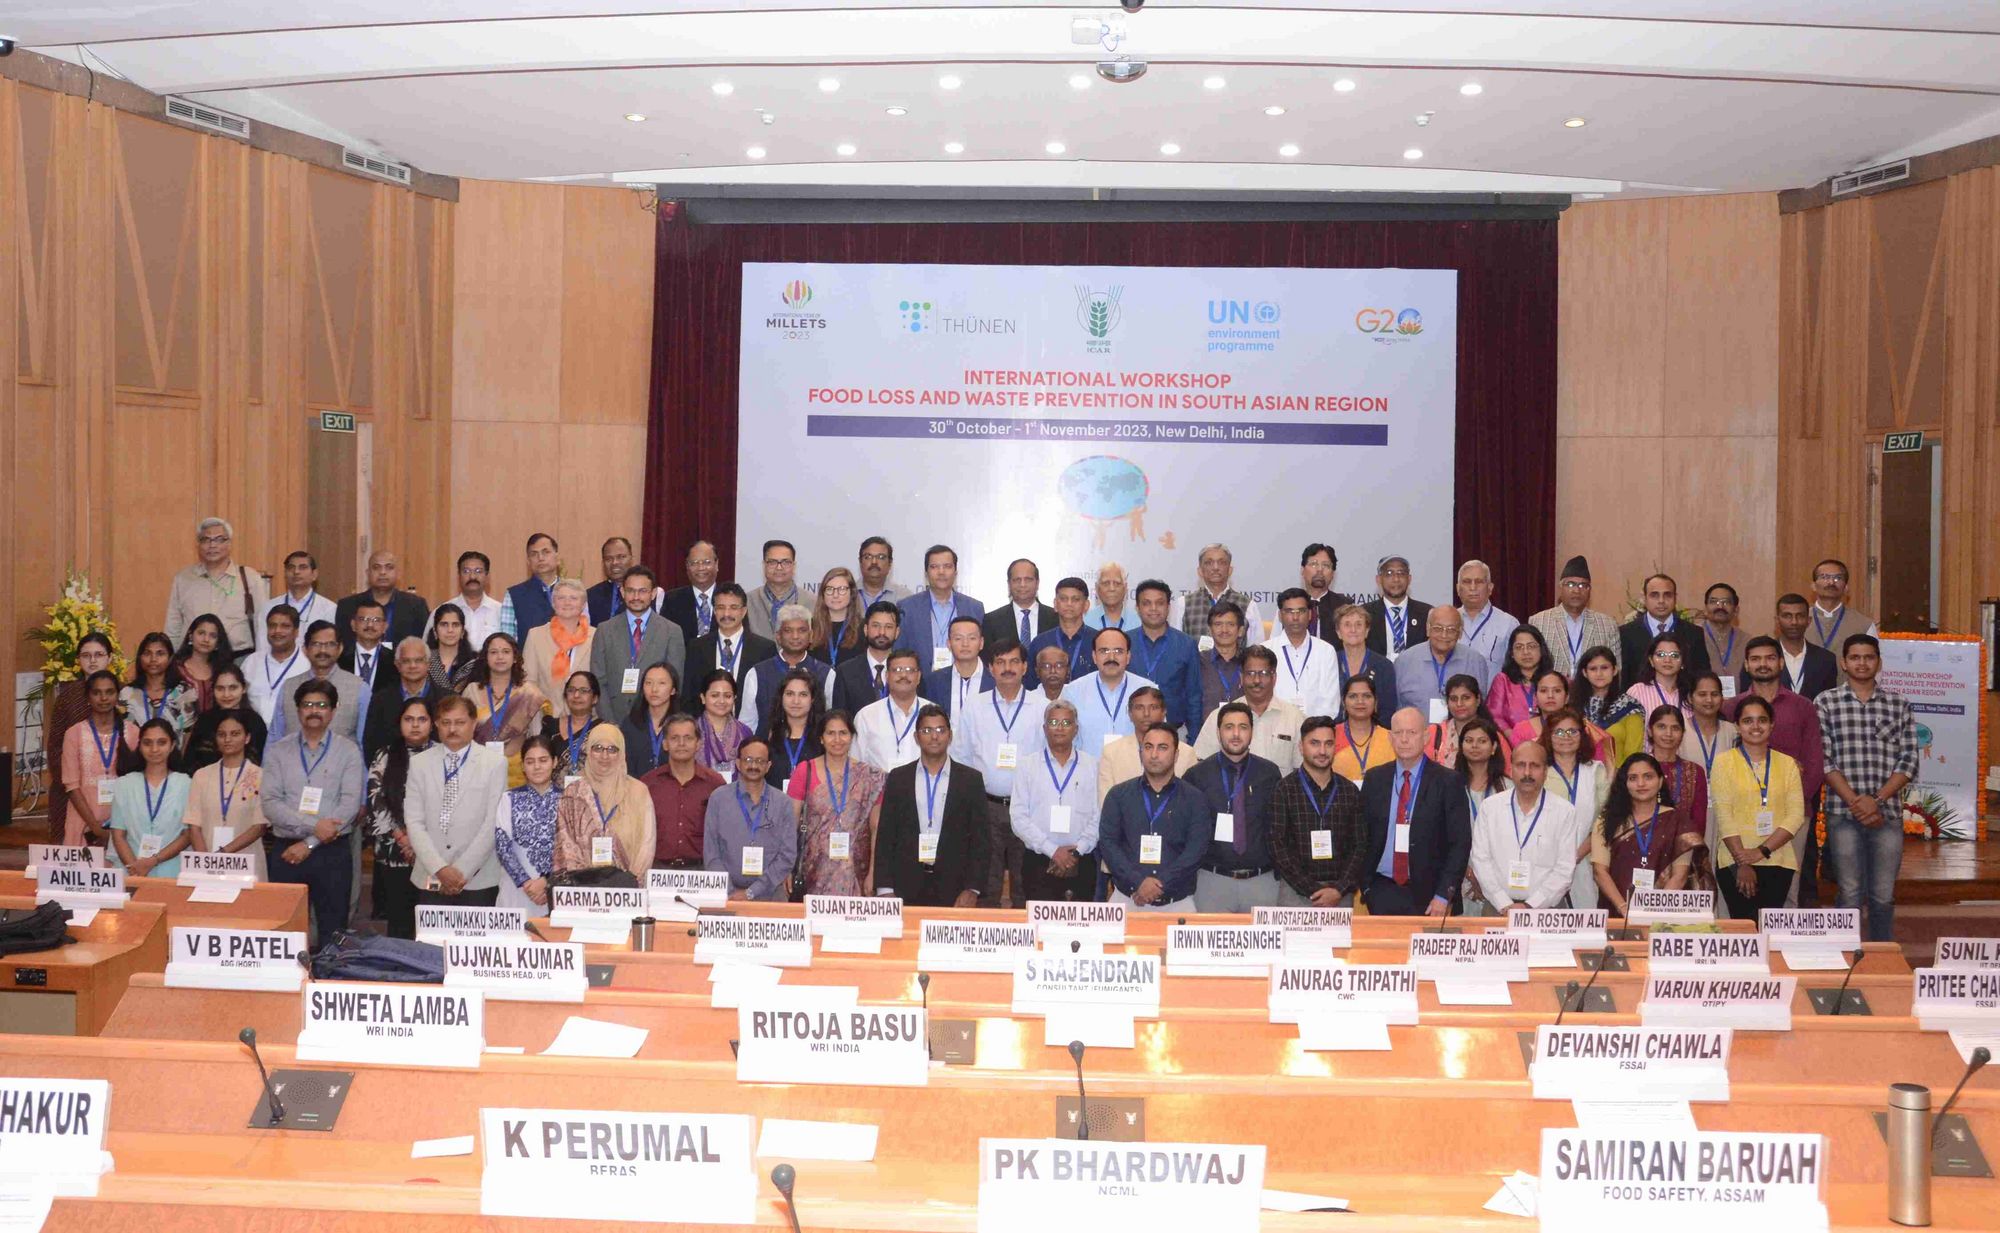 Family photo of the International Food Loss and Waste Workshop on the first day.